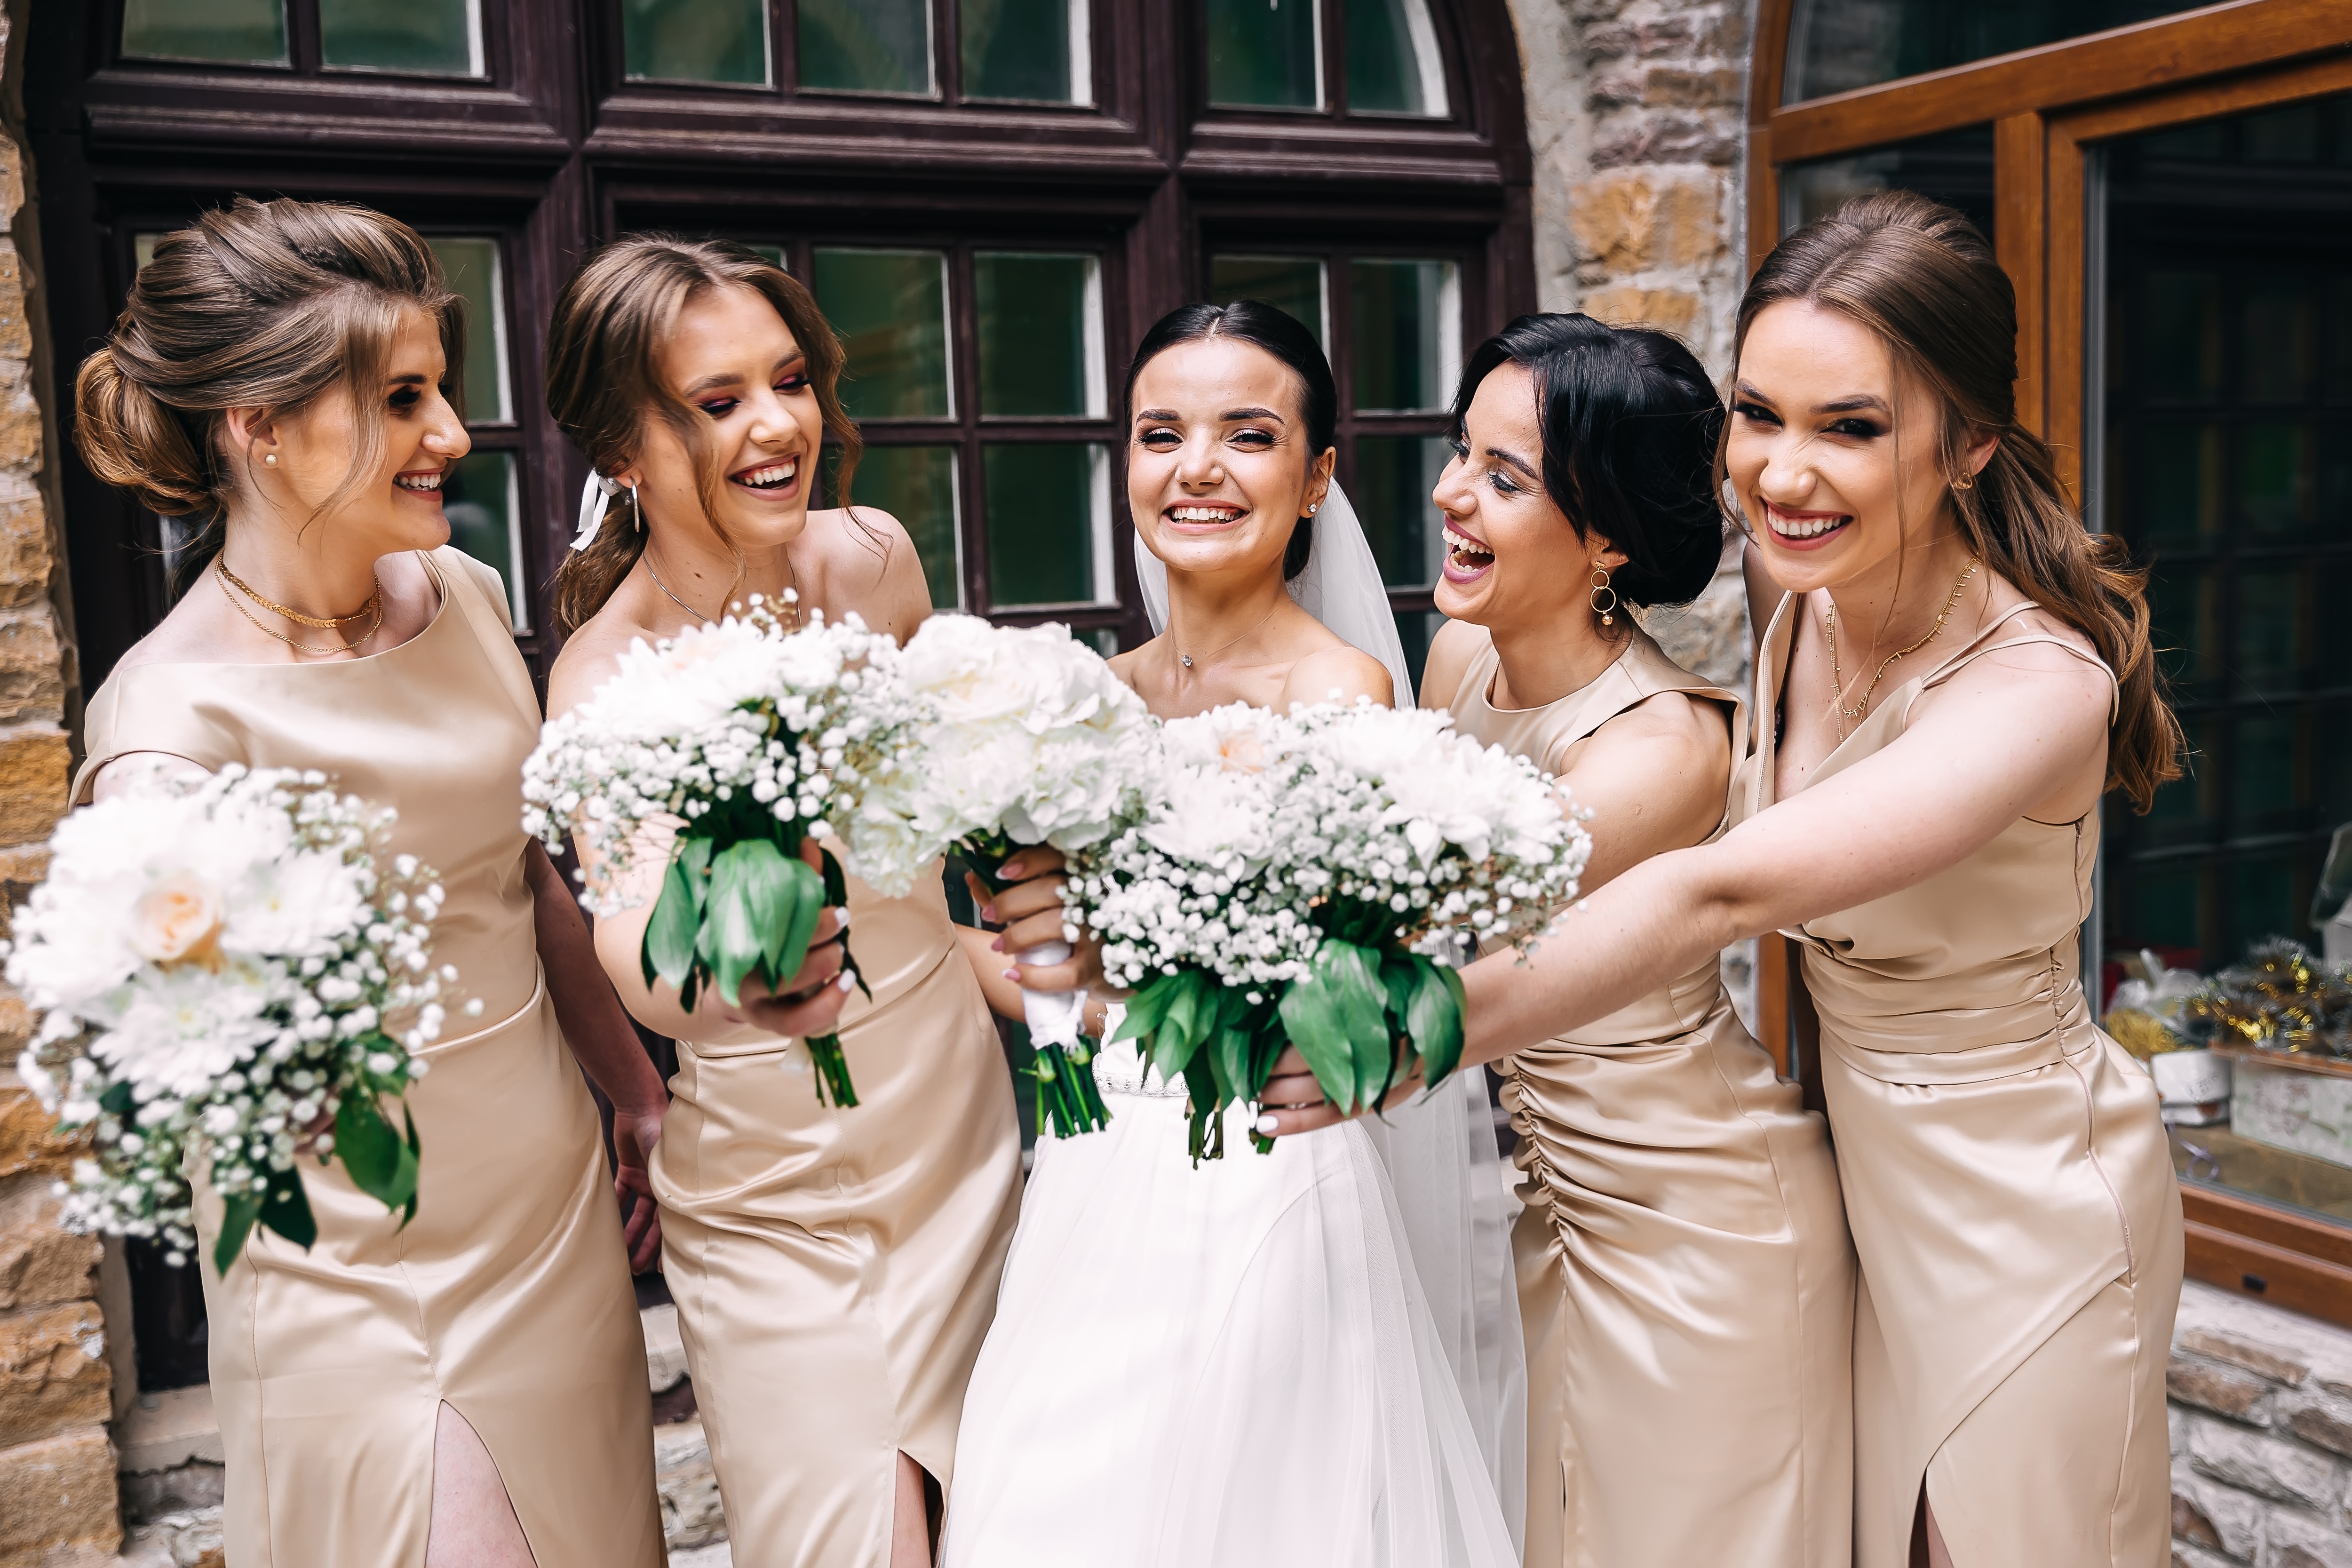 A happy bridal party posing for a photo | Source: Shutterstock